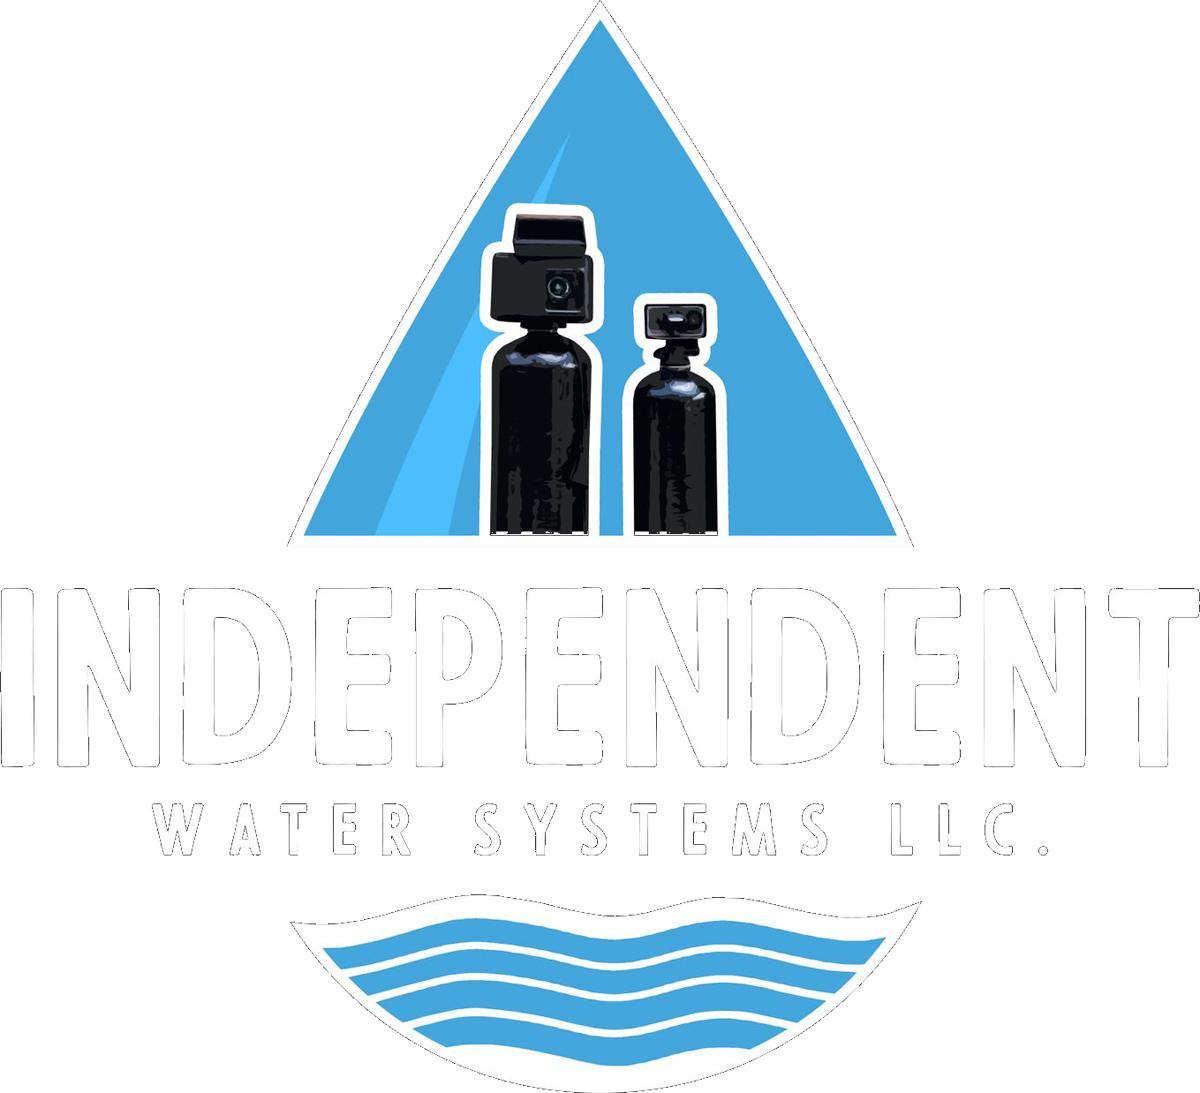 Filtration softener systems lake. Clipart water water system